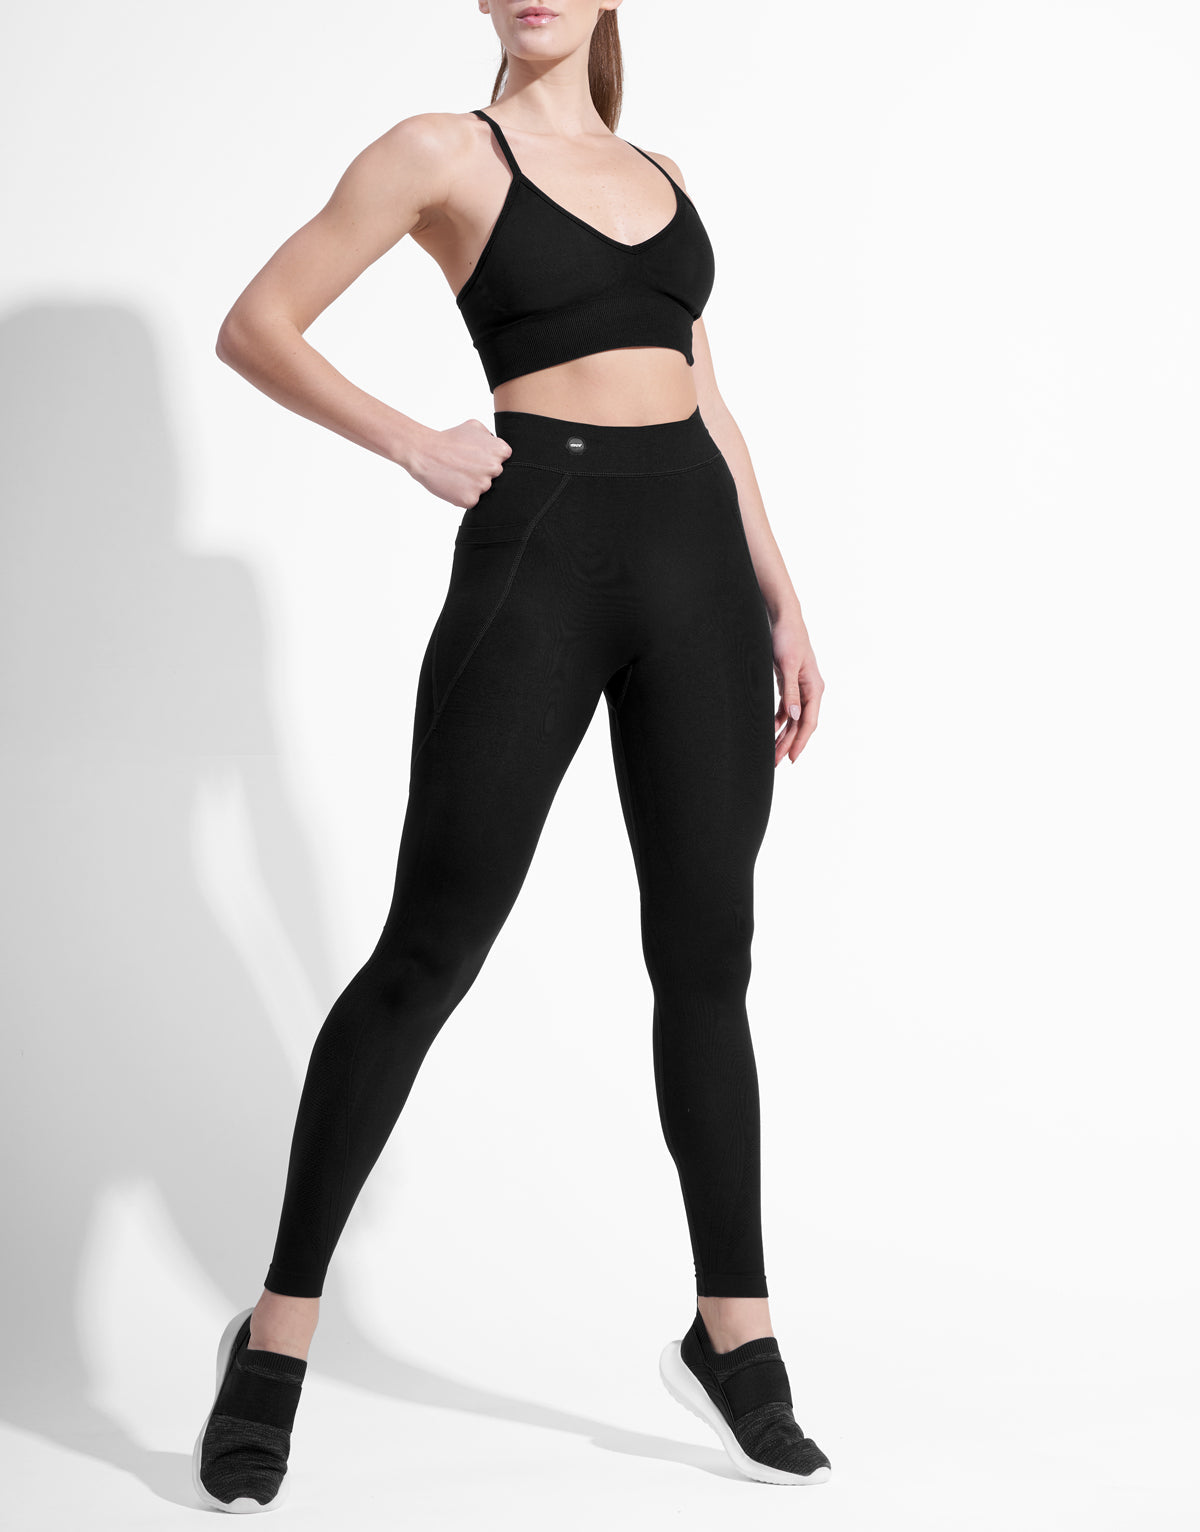 POUCH BLACK SEAMLESS TOP